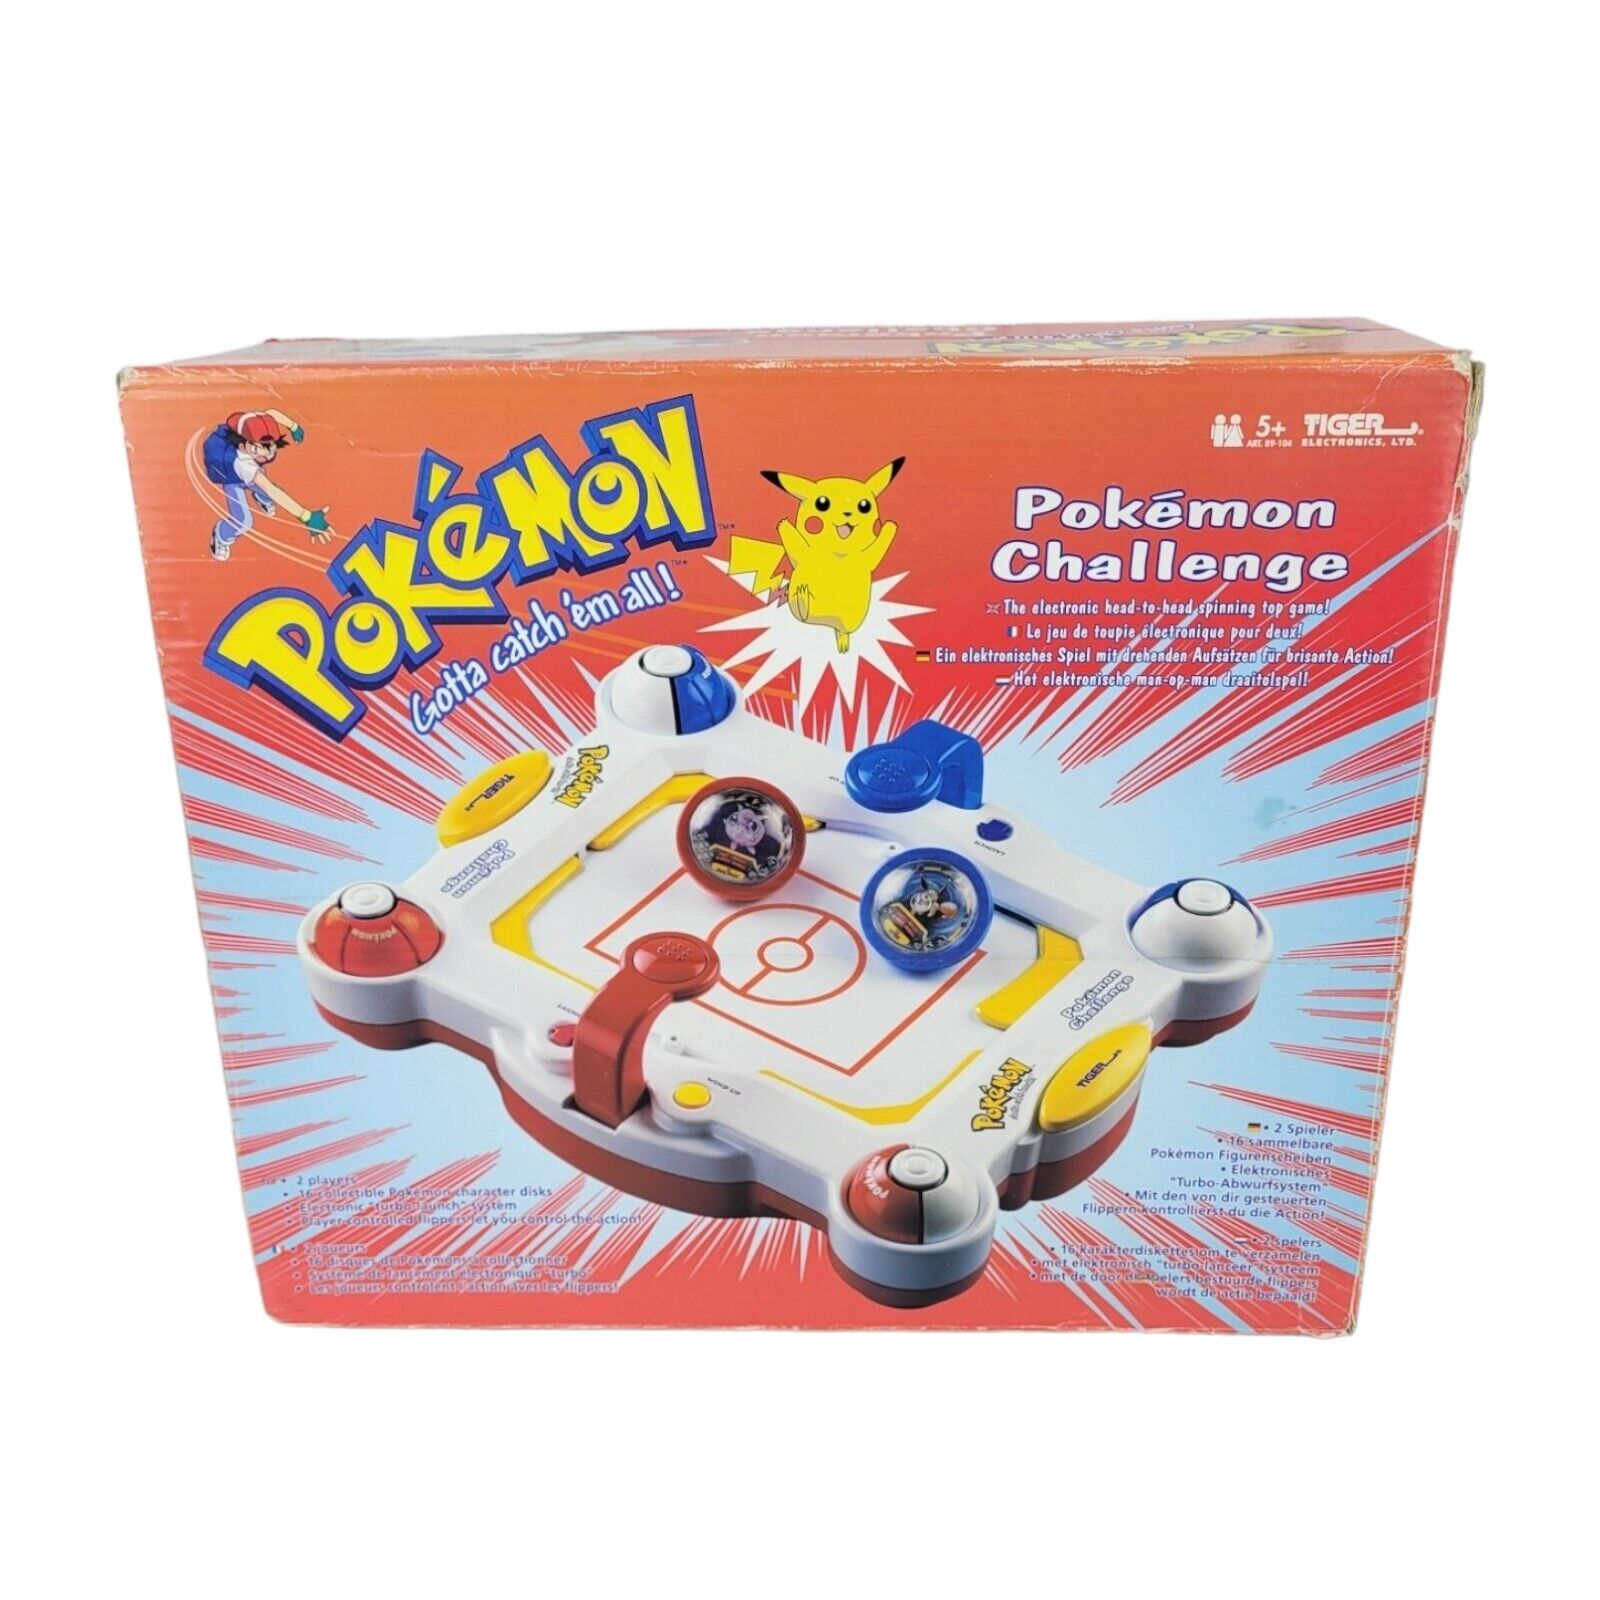 Pokemon Challenge Electronic Game by Tiger 1994 - Not Working